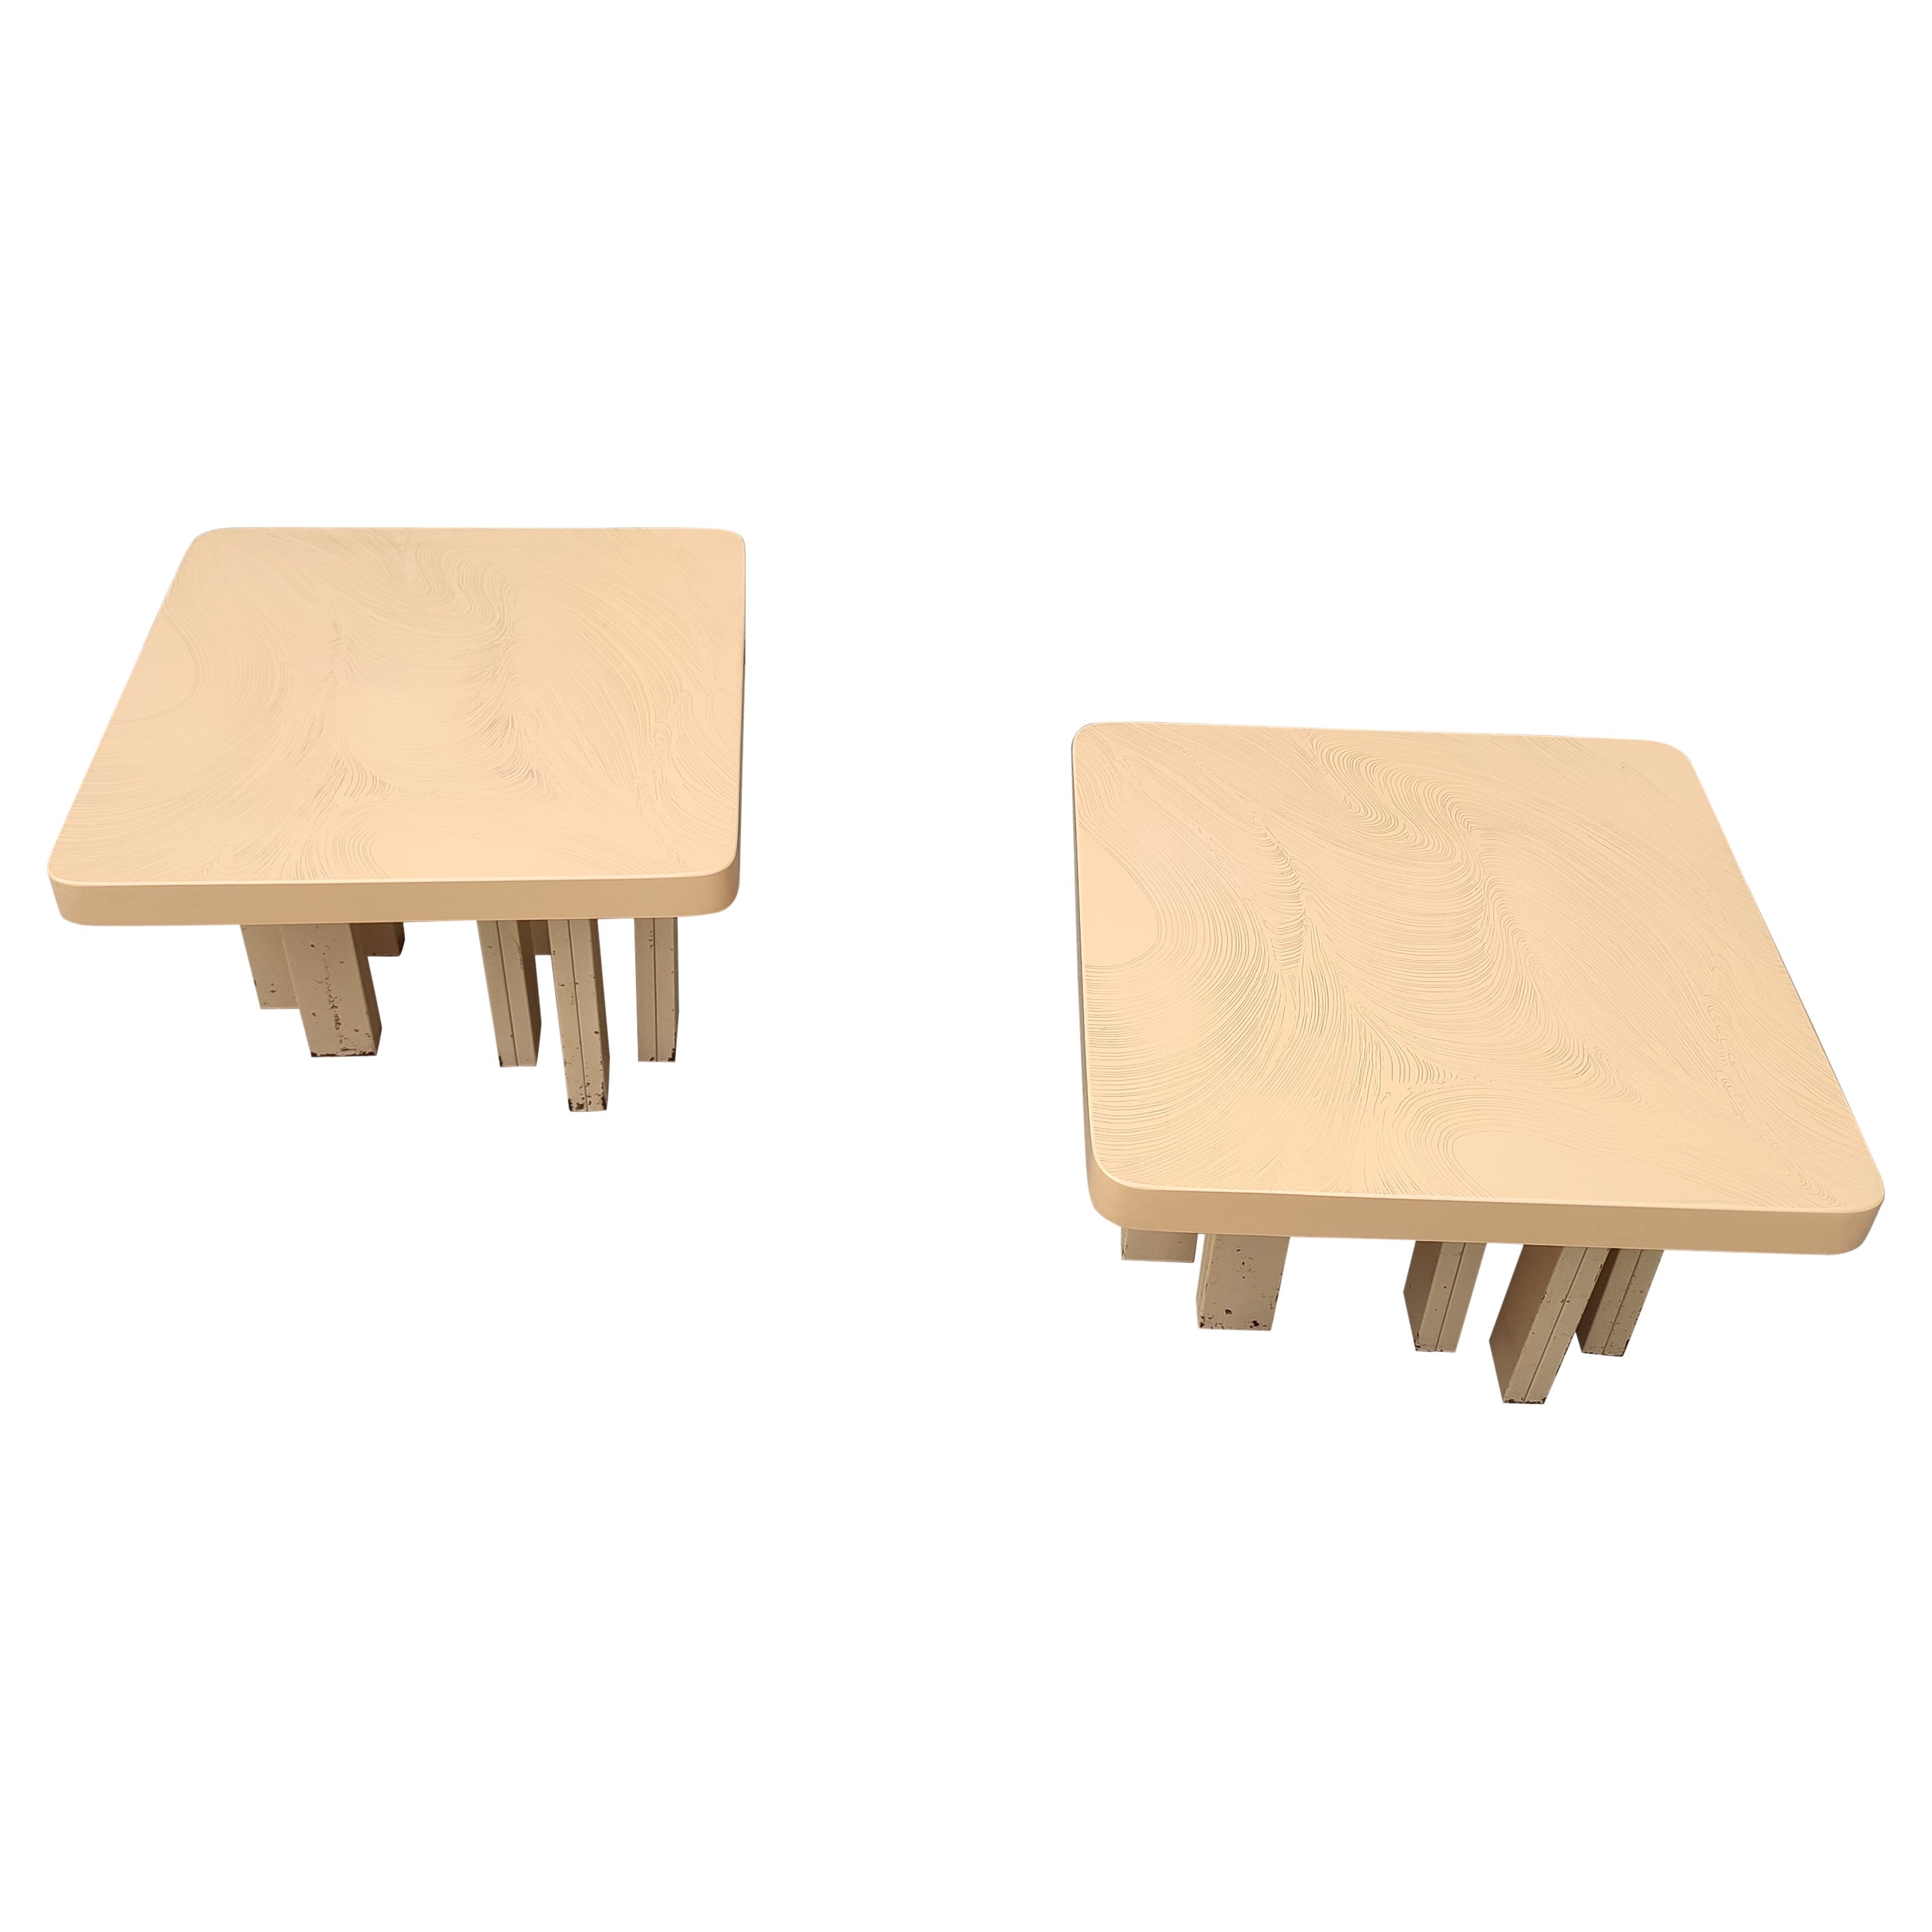 White Cream Resin Pair of Side Tables from Jean Claude Dresse, Belgium, 1970s